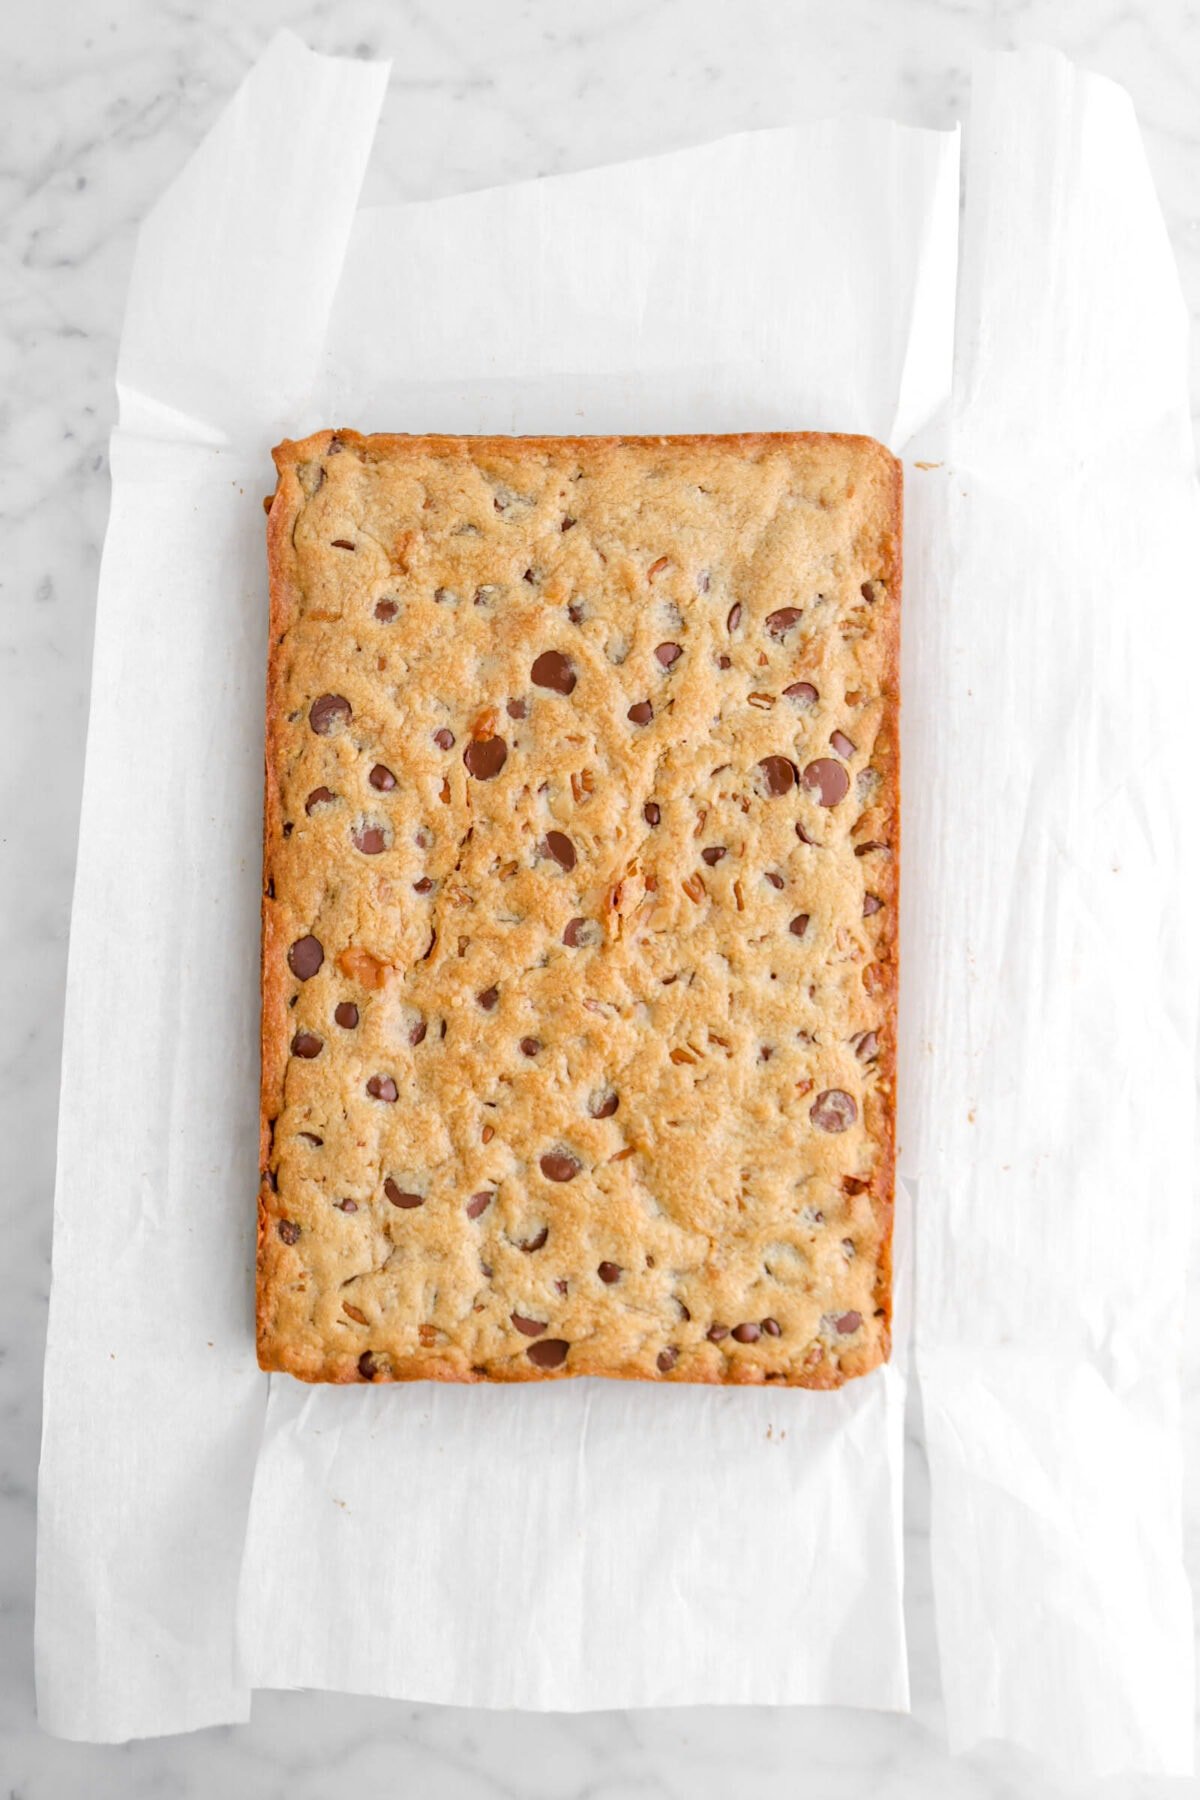 Rectangular cookie on parchment paper on marble surface